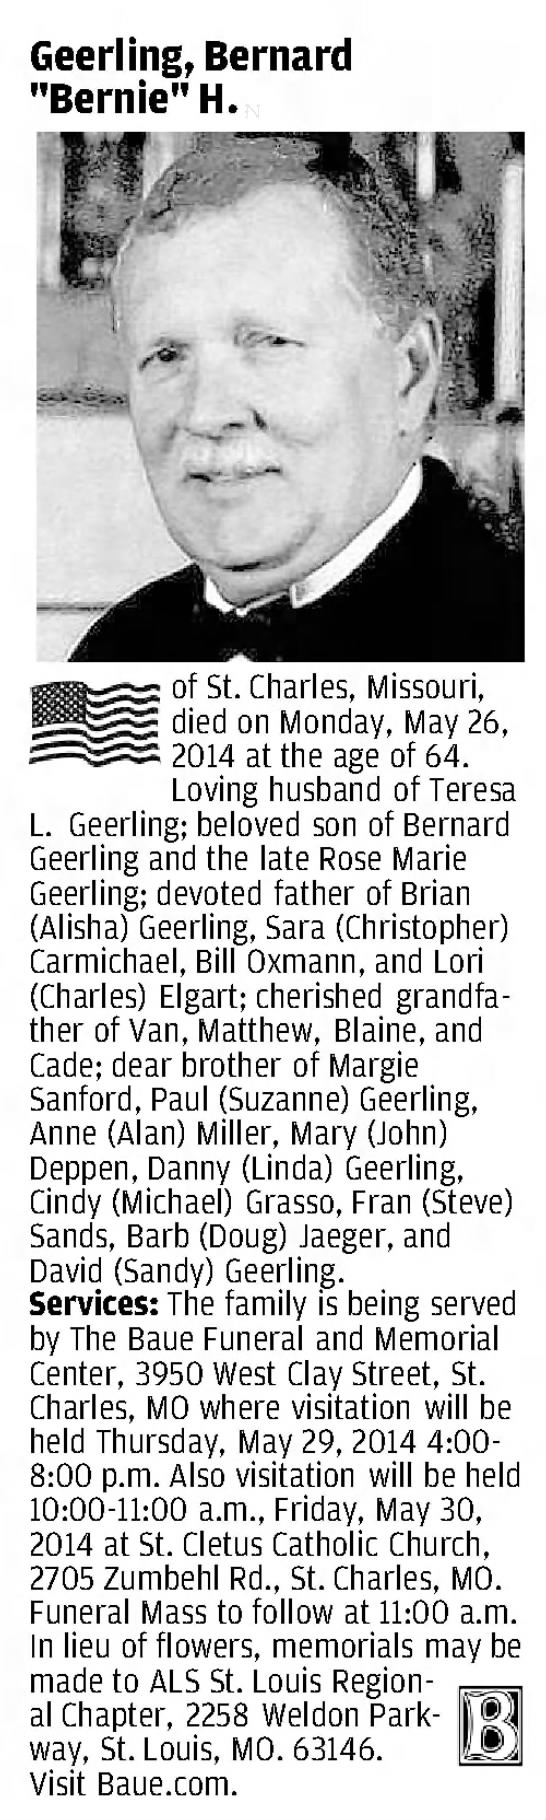 Bernie Geerling obituary in 29 May 2014 St. Louis Post-Dispatch - 0